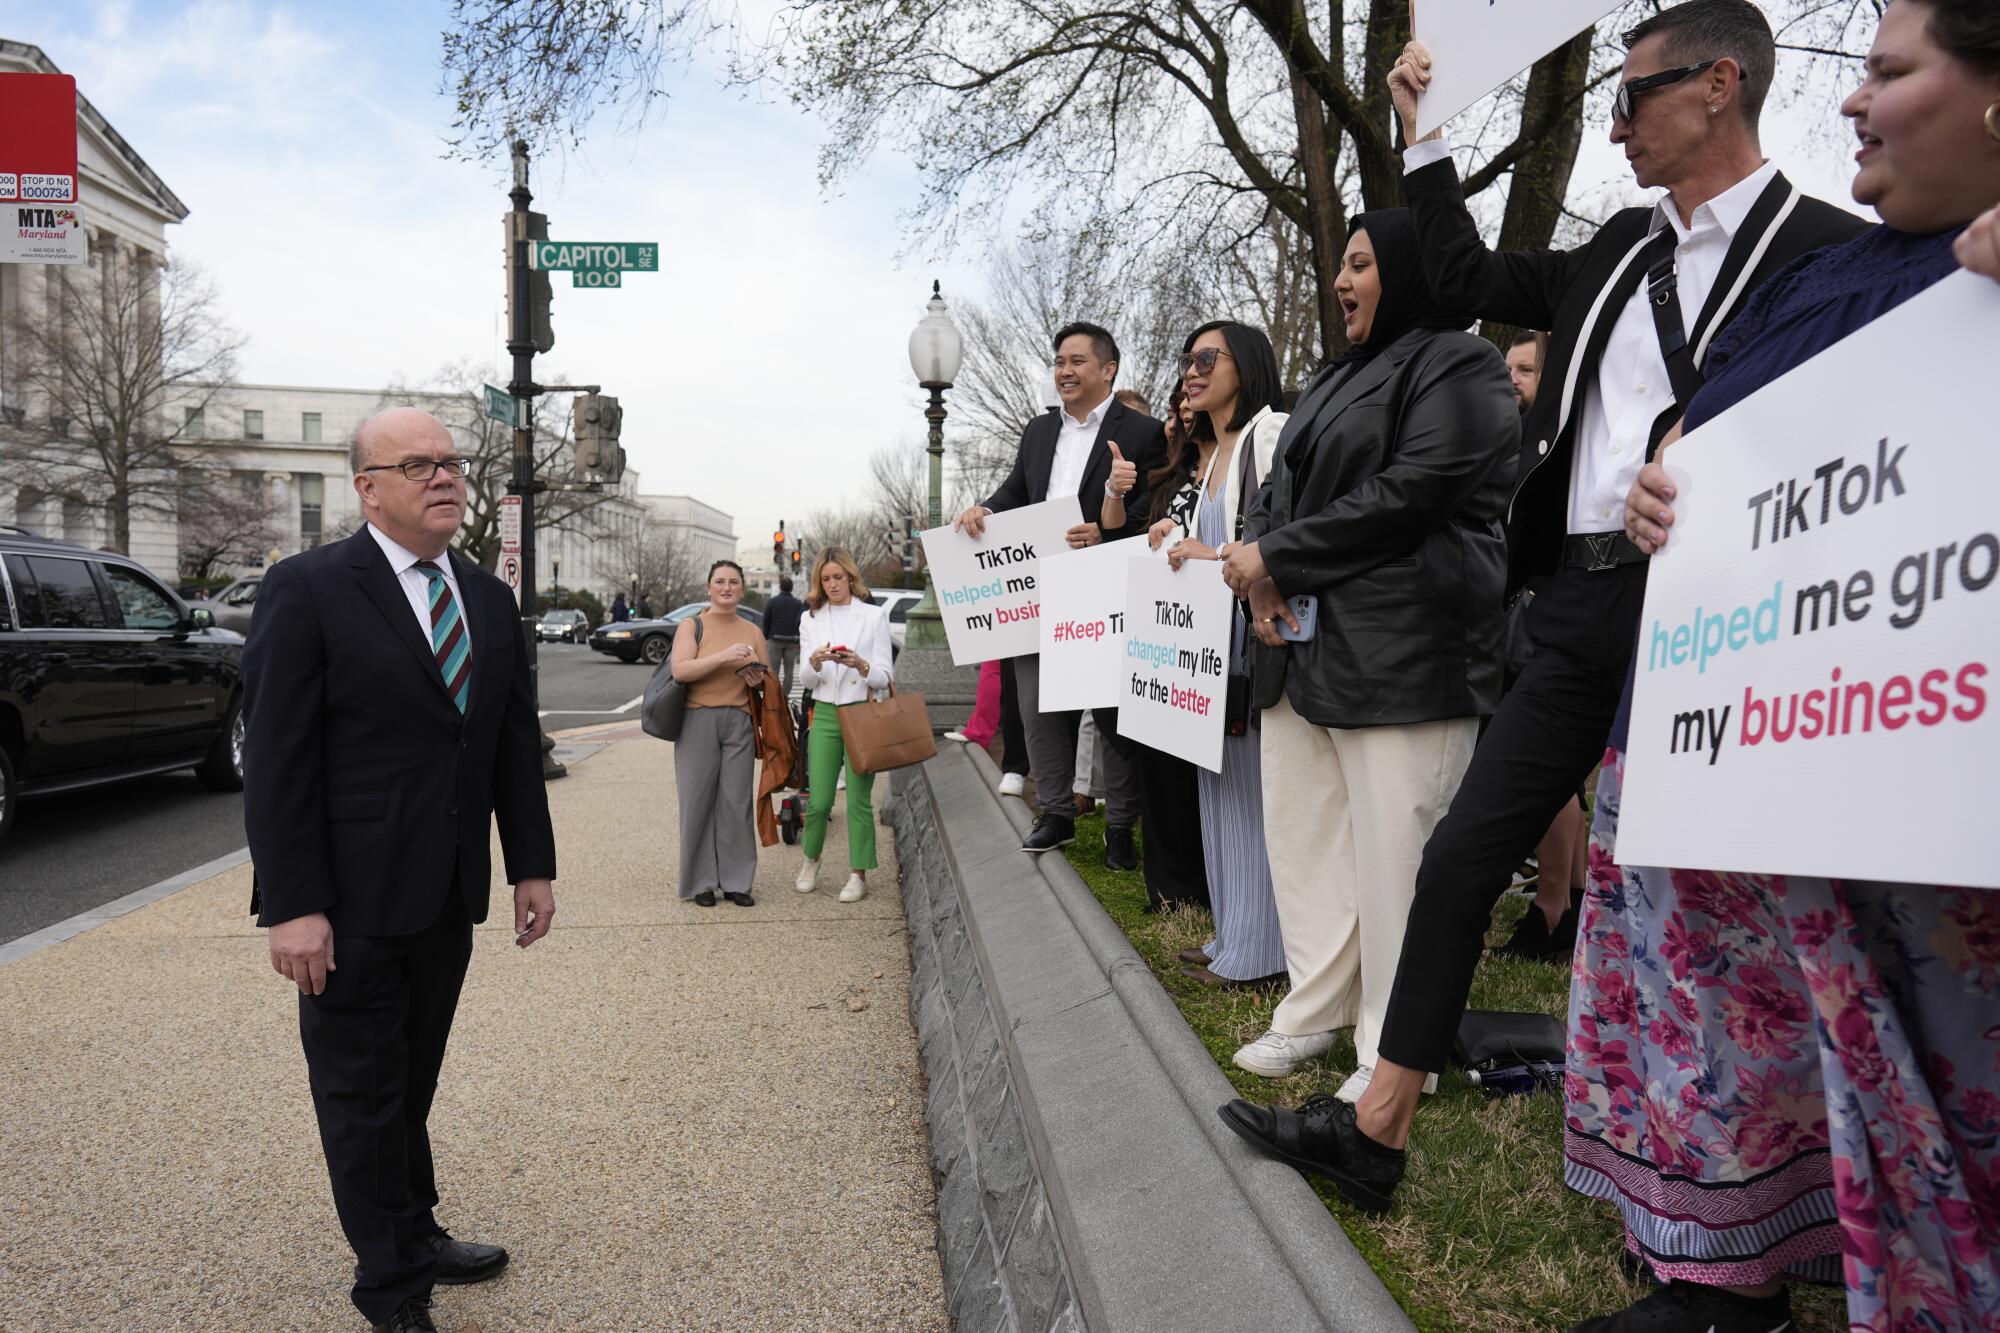 People lined up with pro-TikTok signs on a sidewalk near the U.S. Capitol as a man in a suit looks on